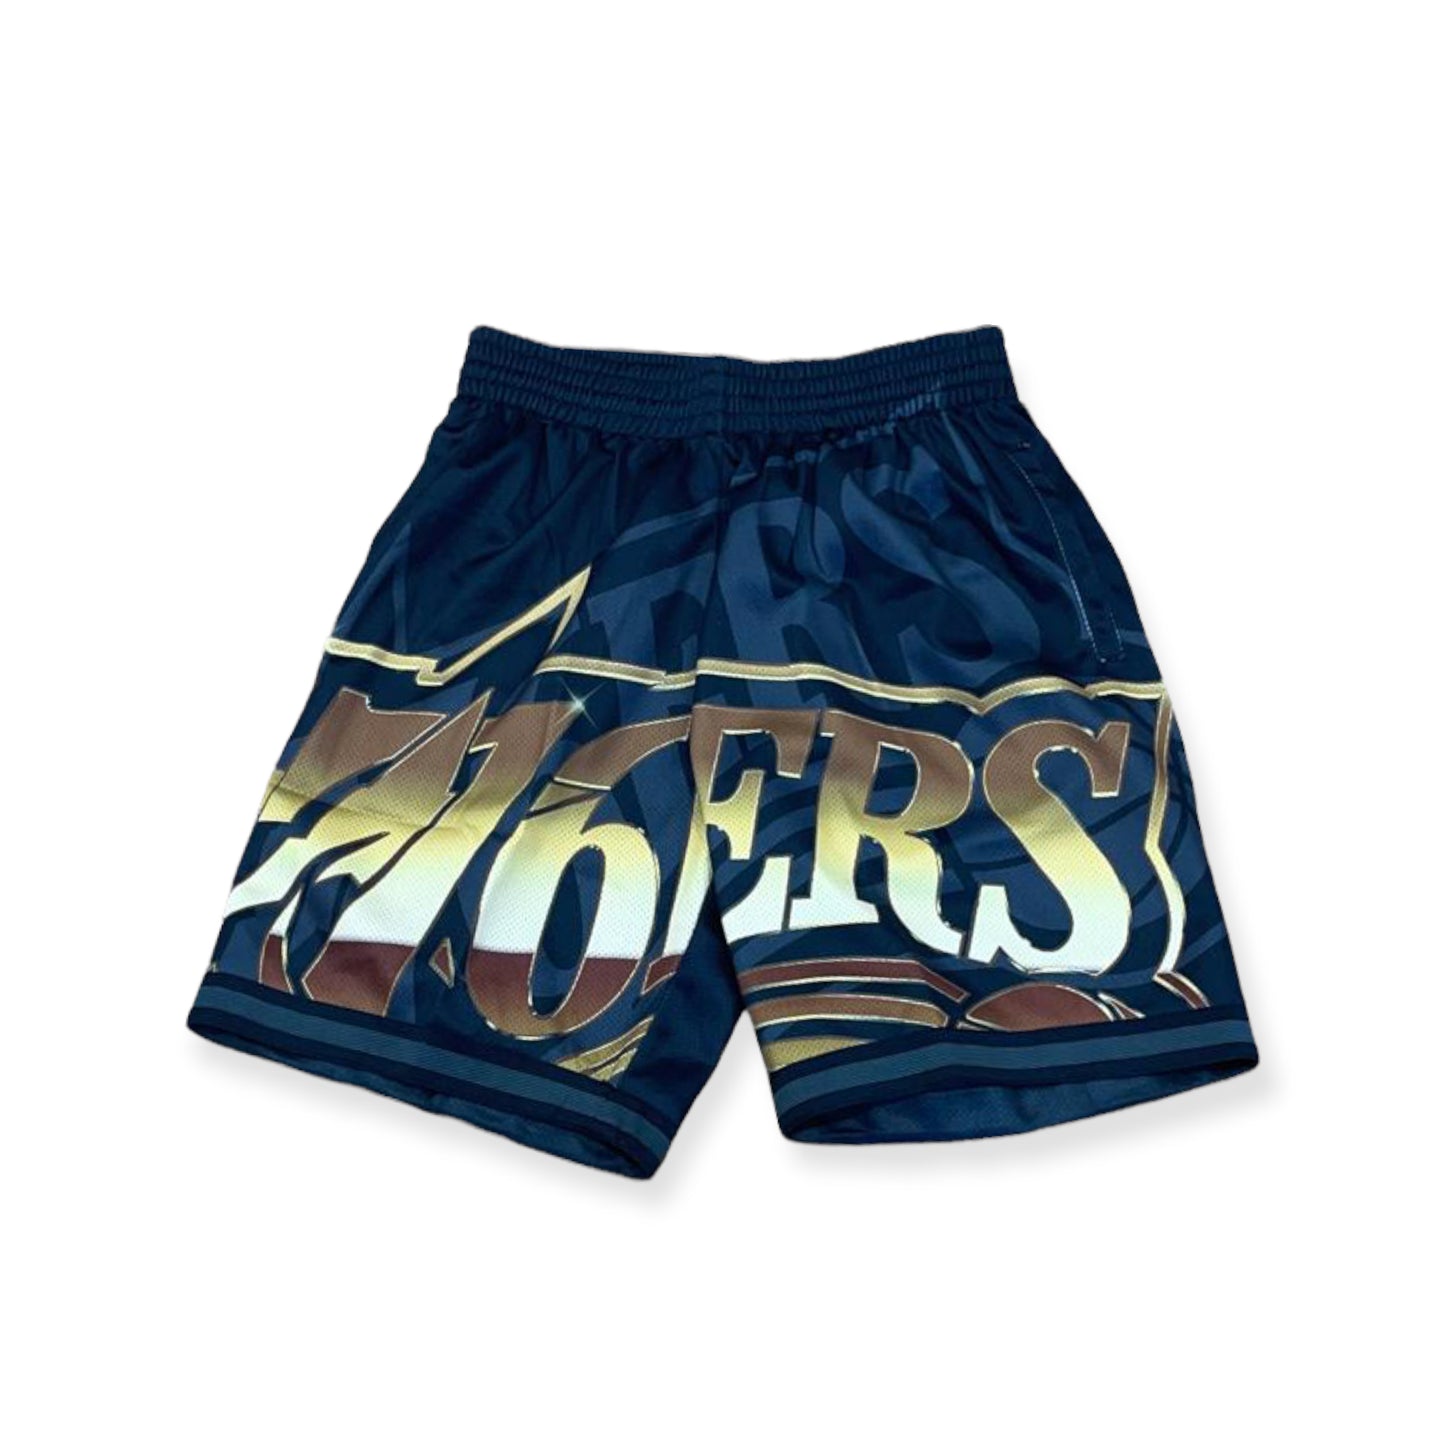 MITCHELL & NESS: 76ers Big Face 4.0 Shorts